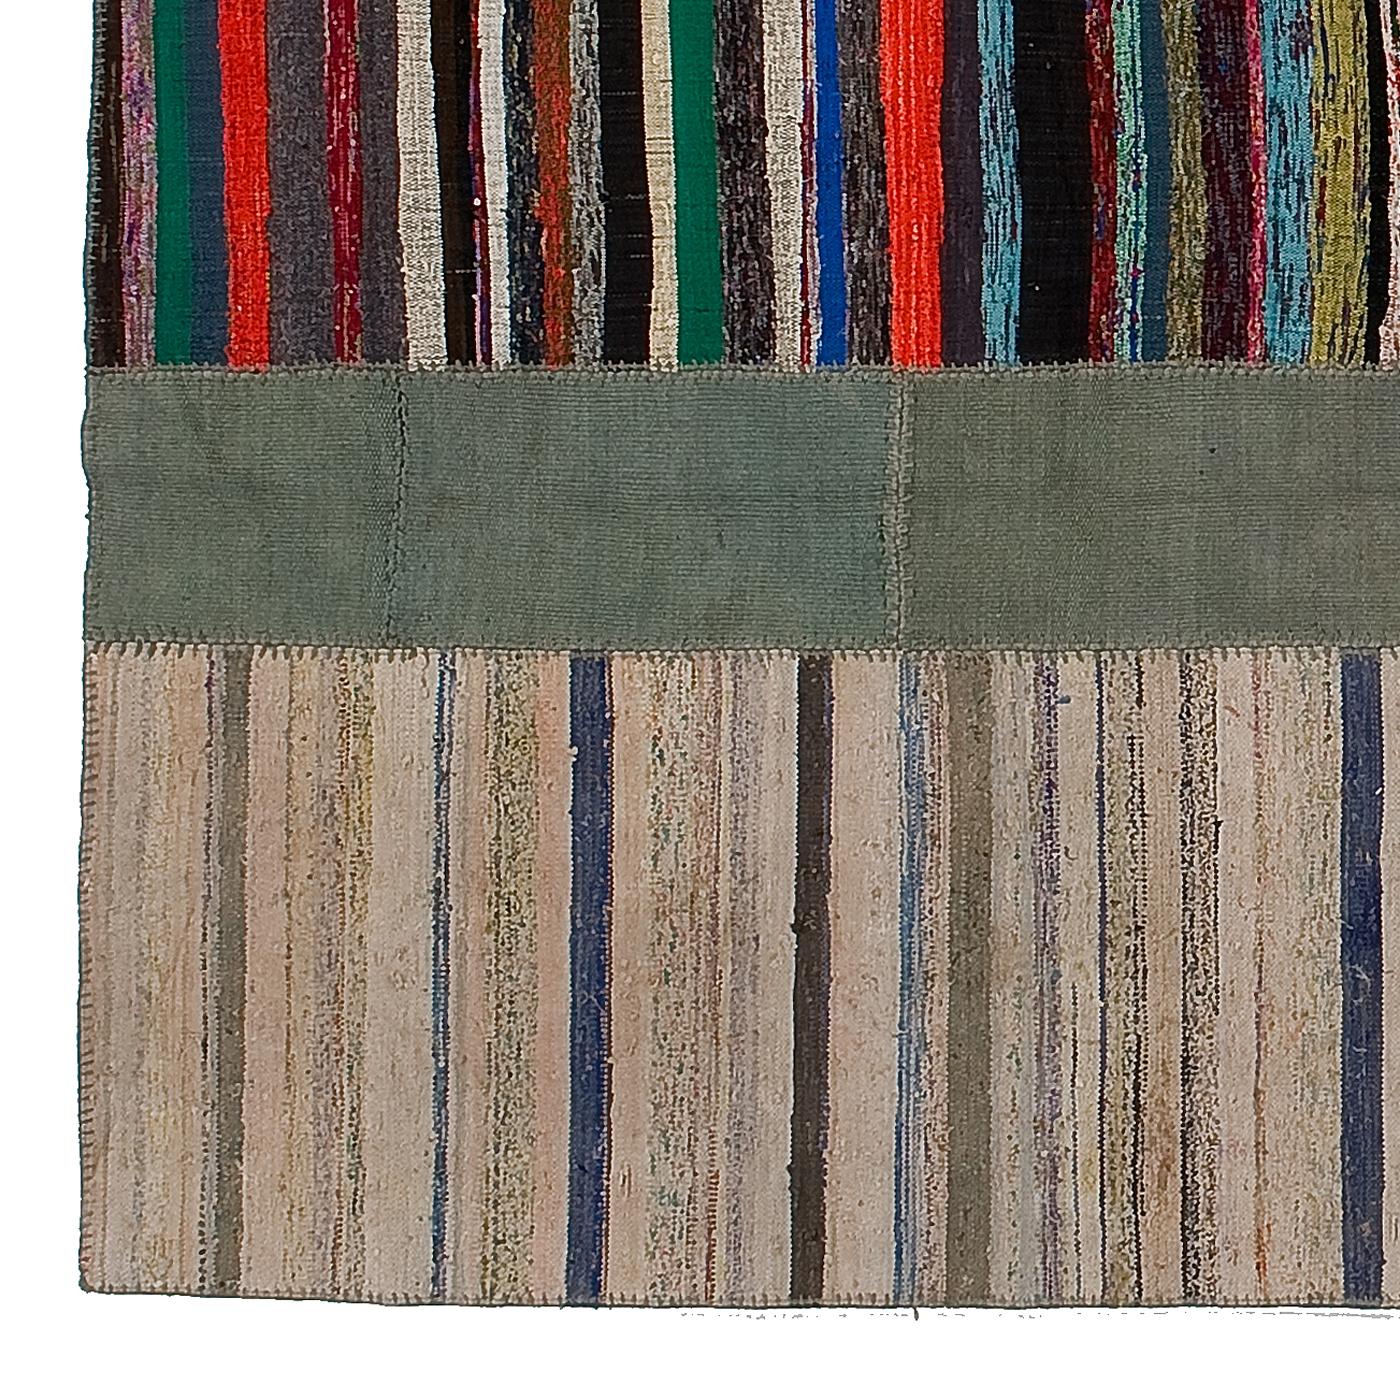 This mesmerizing carpet is part of the Patchwork collection, in which pieces of vintage rugs are cut by hand, dyed with vegetable substances, and hand sewn using precious yarns to create pieces of striking floor decorations that effortlessly combine